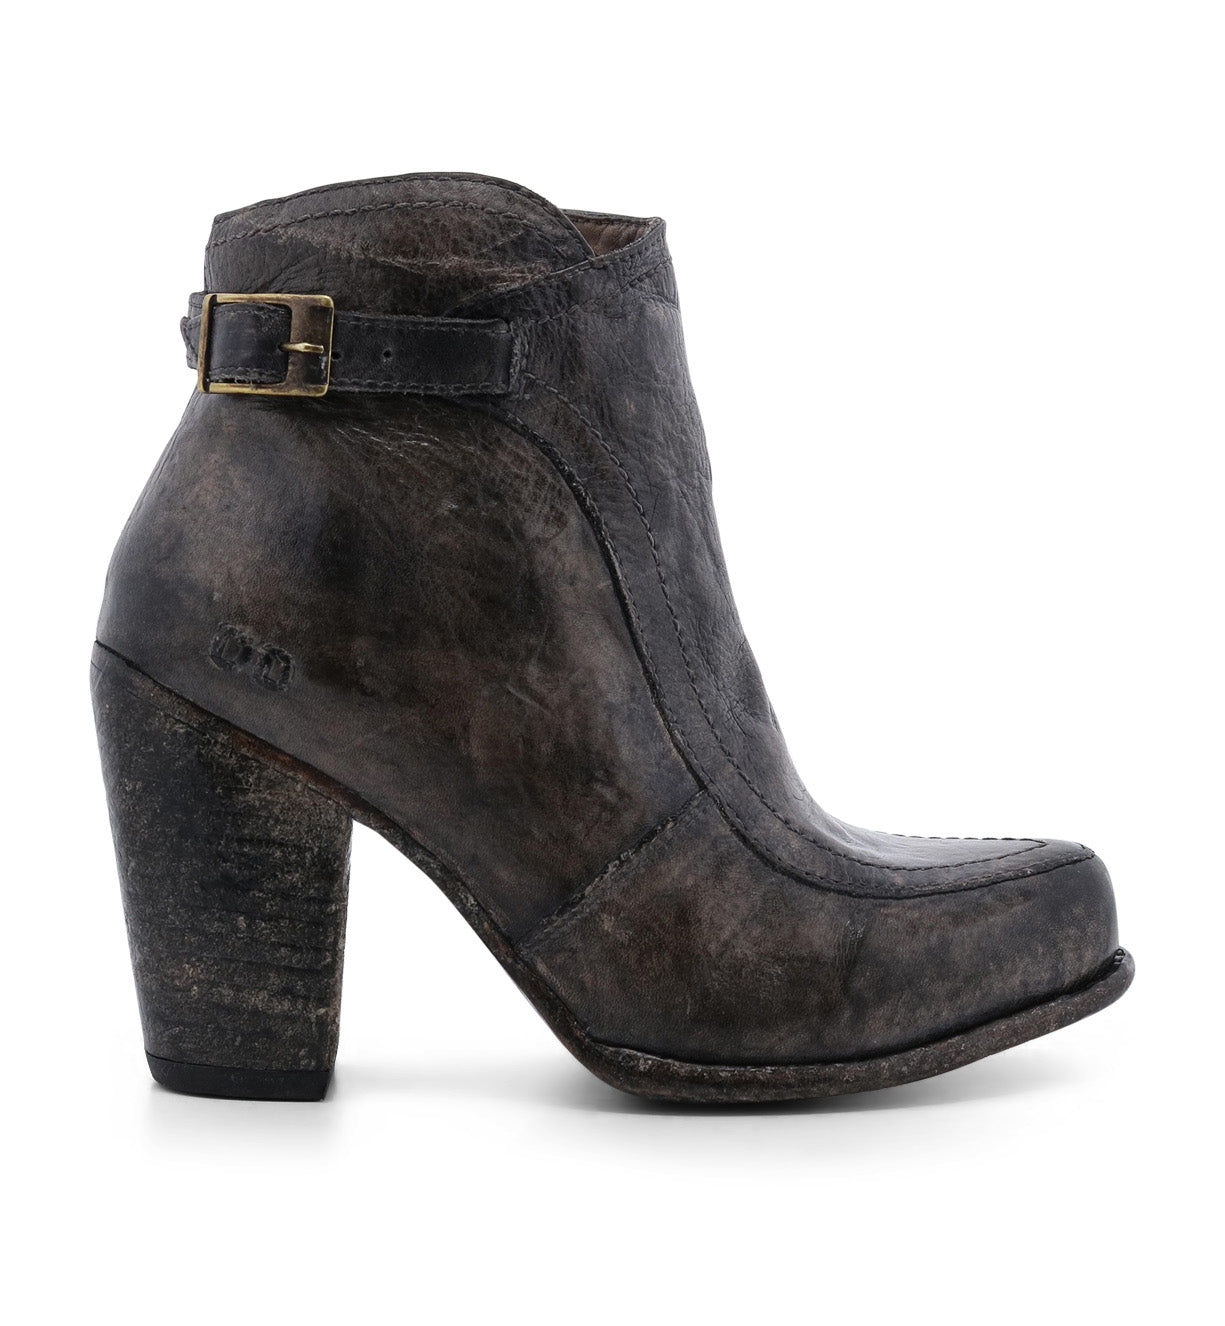 A women's grey Isla ankle boot with a metal buckle by Bed Stu.